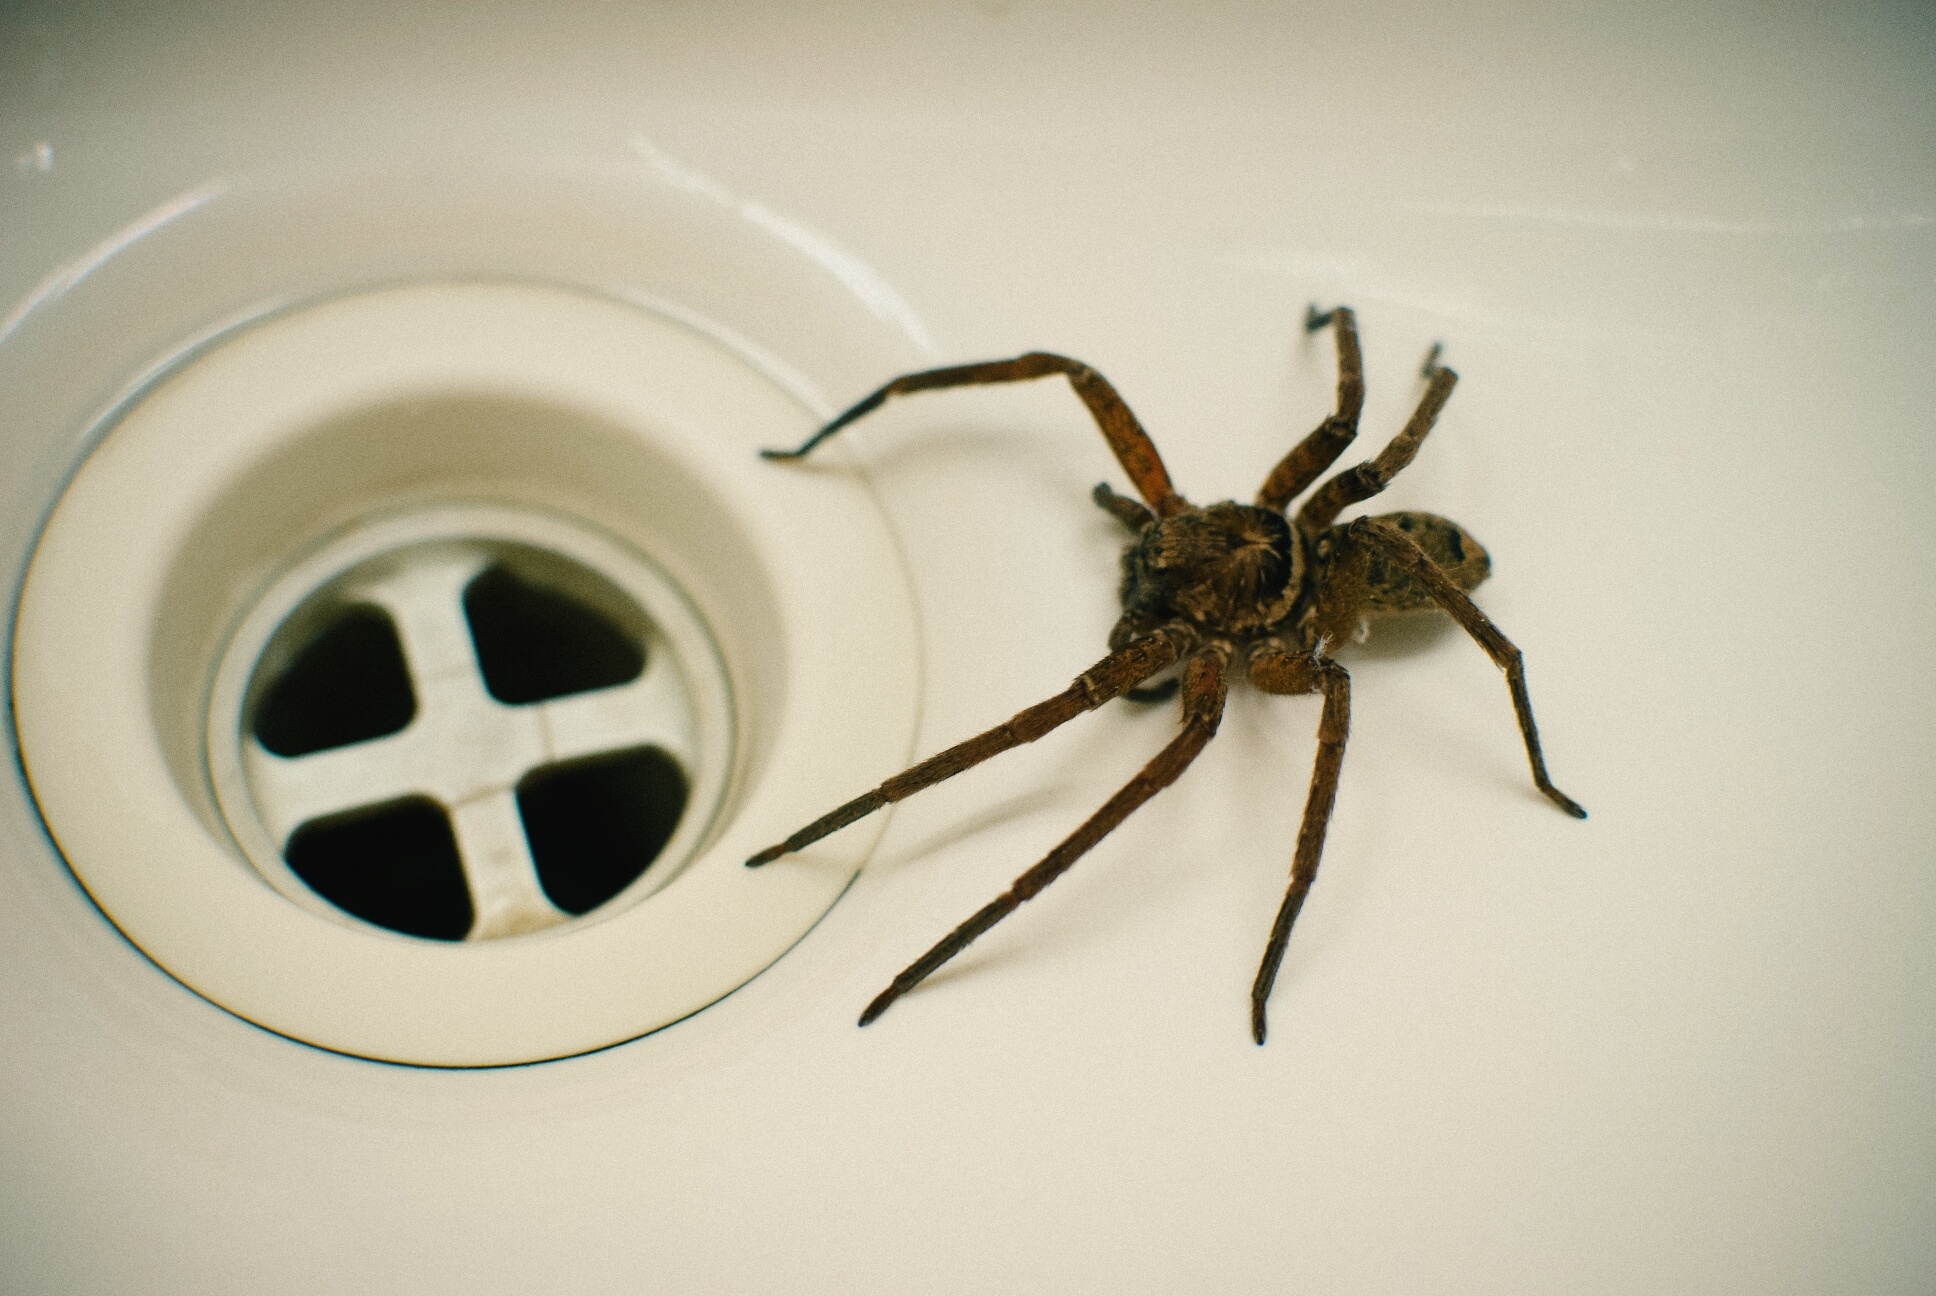 Spider Season Is Coming – These Are the Species to Be Worried About